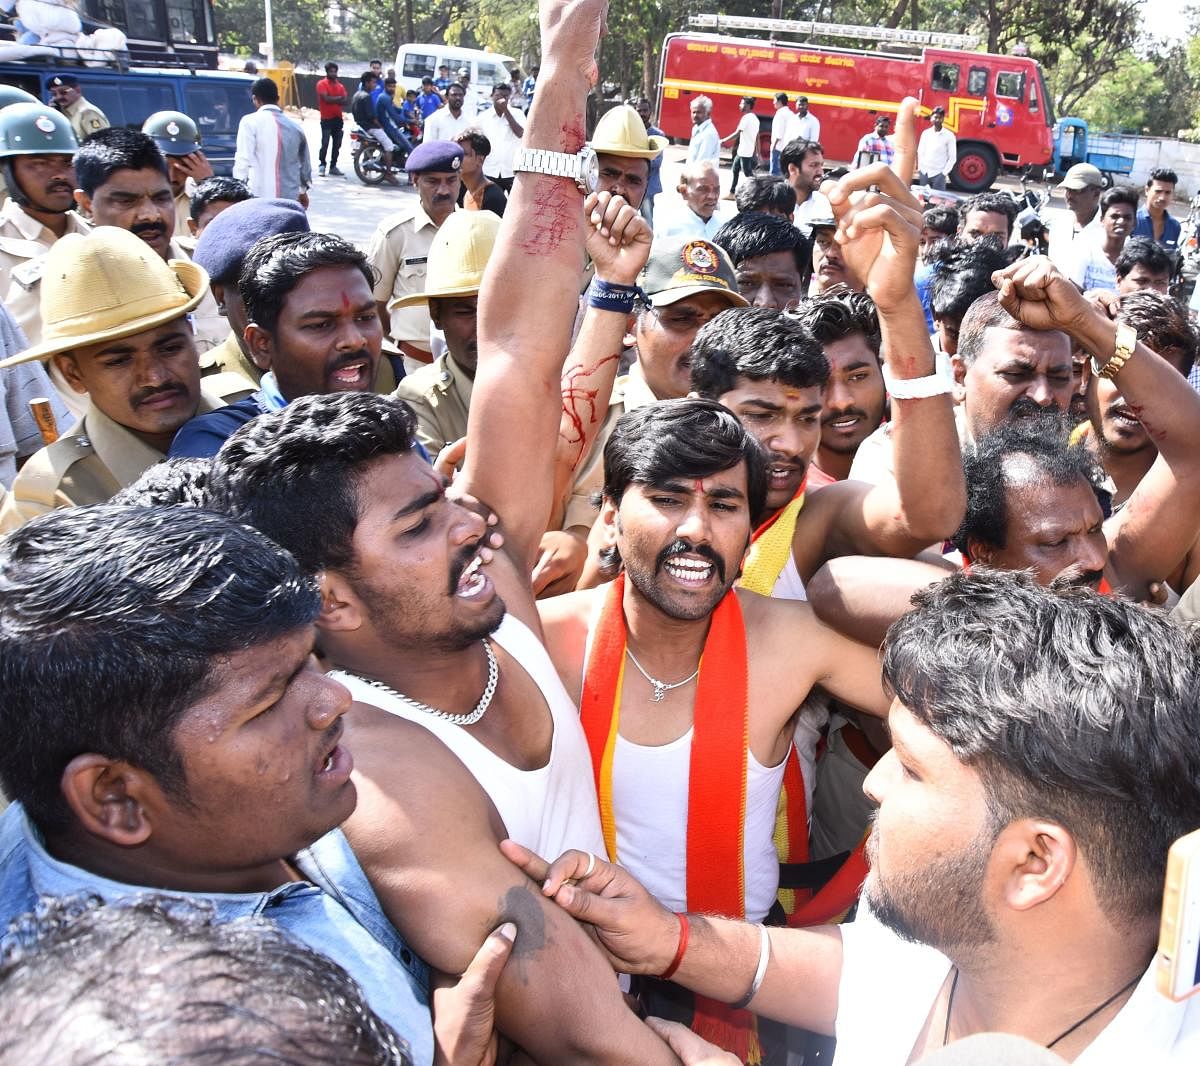 Pro-Kannada activists slit their hand while staging protest near the railway station in Hubballi on Wednesday.